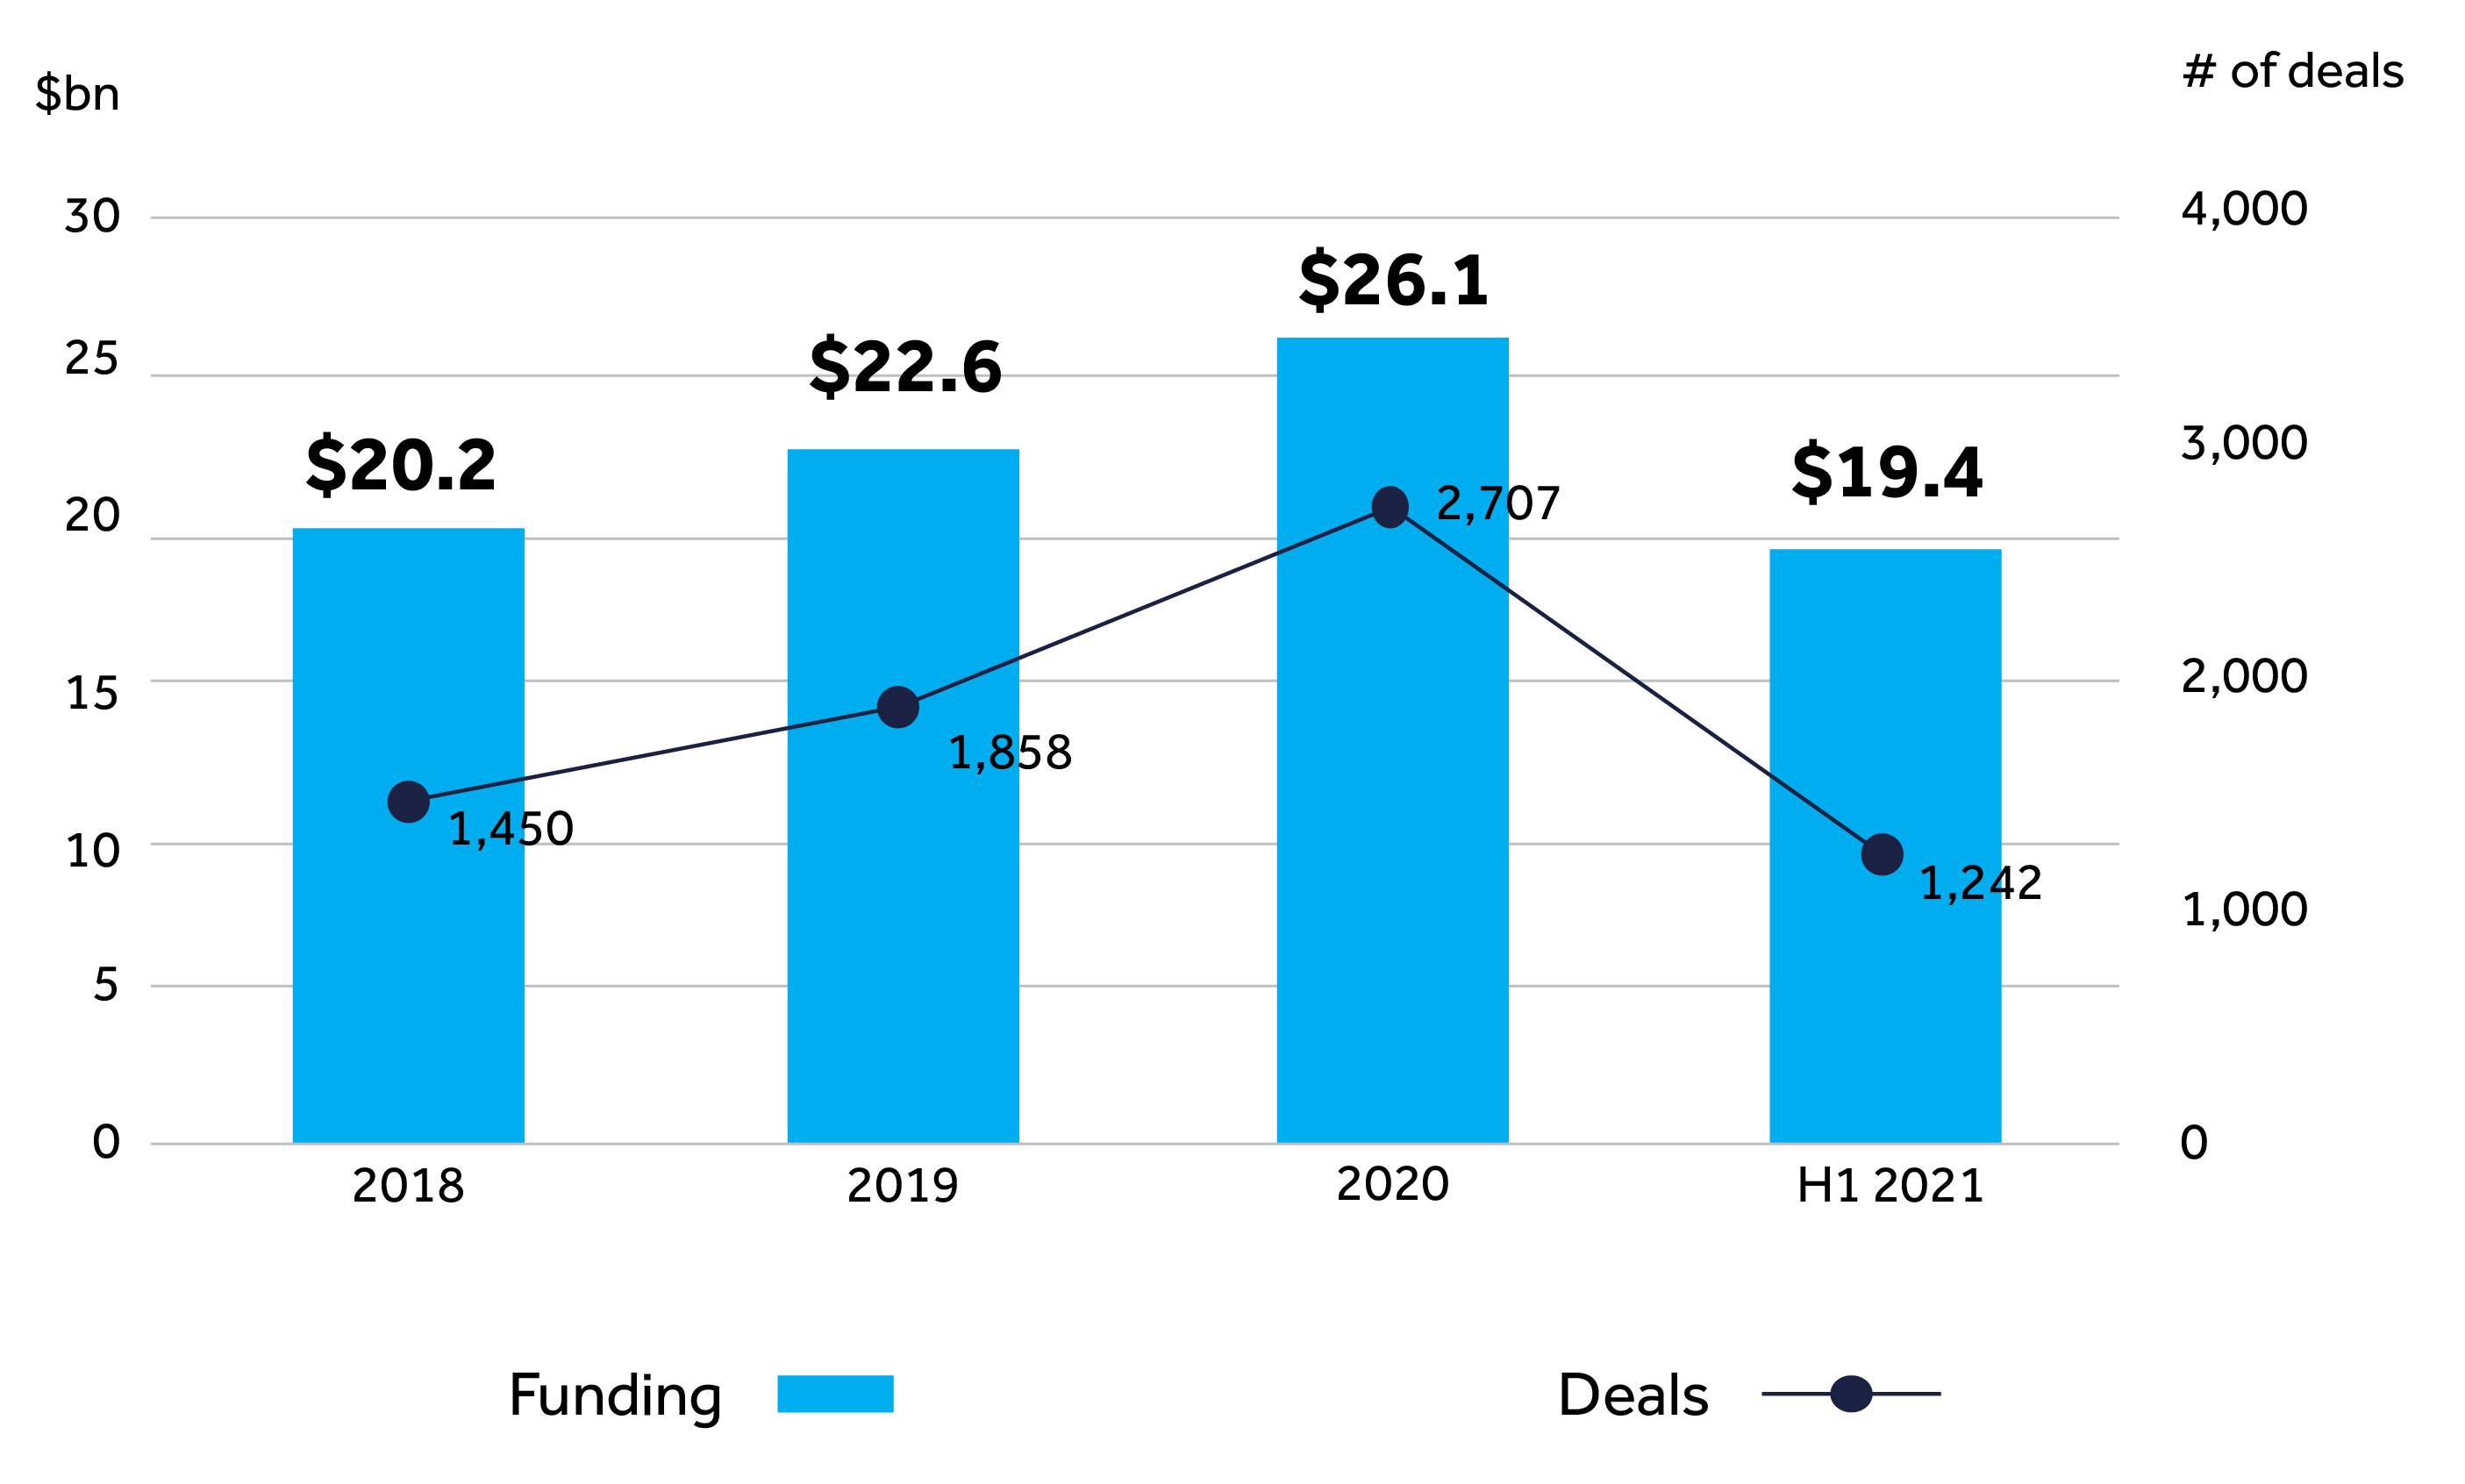 Bar chart showing the amount of private funding and number of deals in the AgTech sector per annum from 2018 to 2021